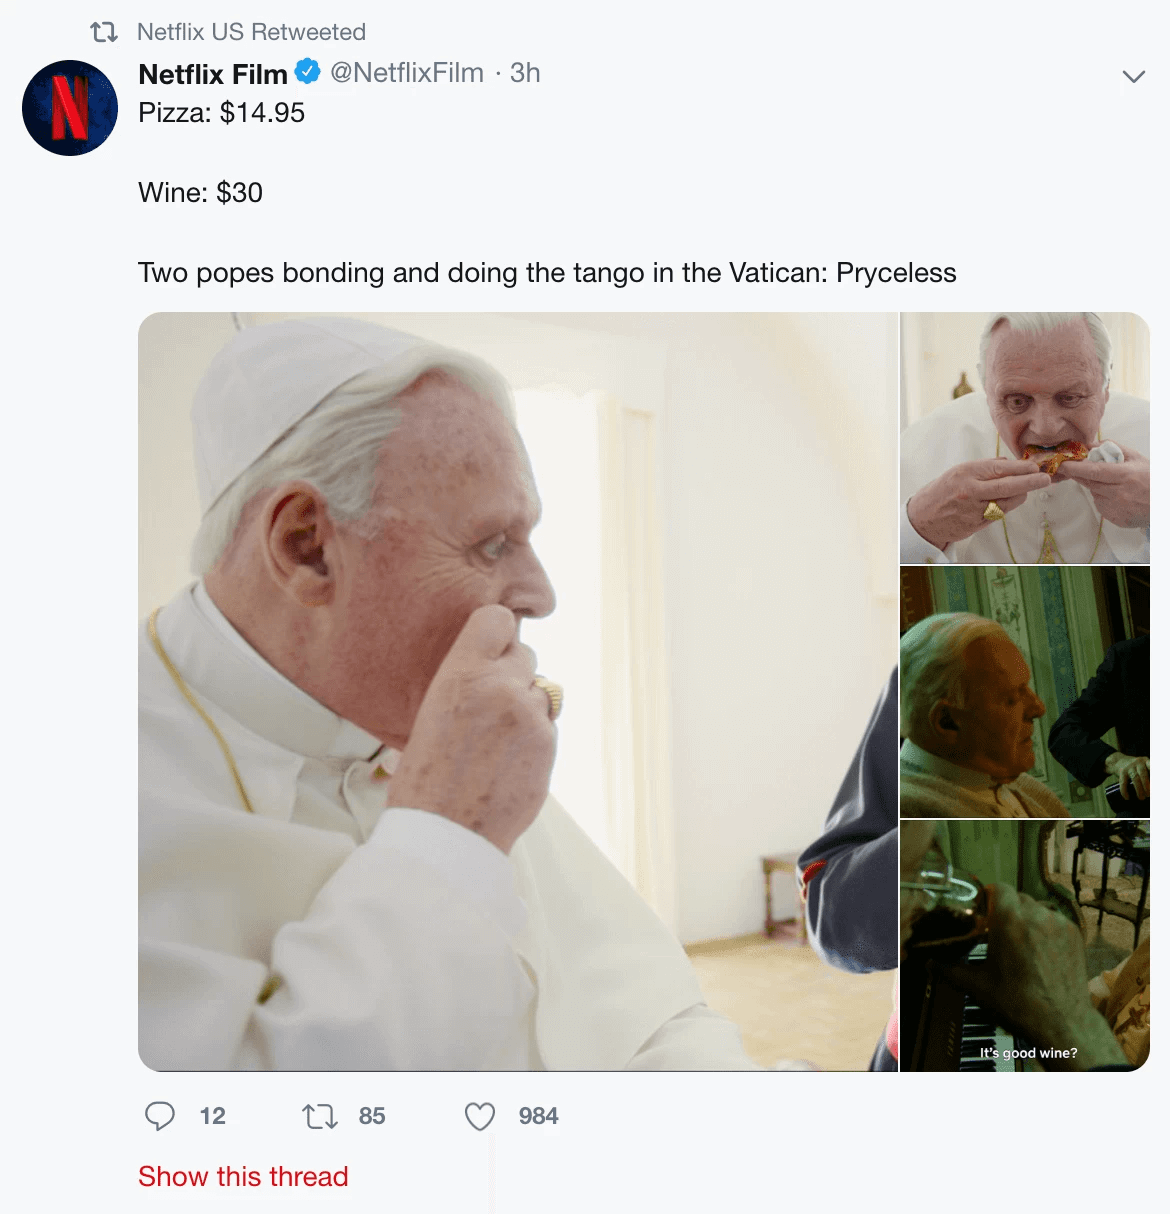 Netflix retweets from one of its own account’s mentioning the scene from “Two popes”. 